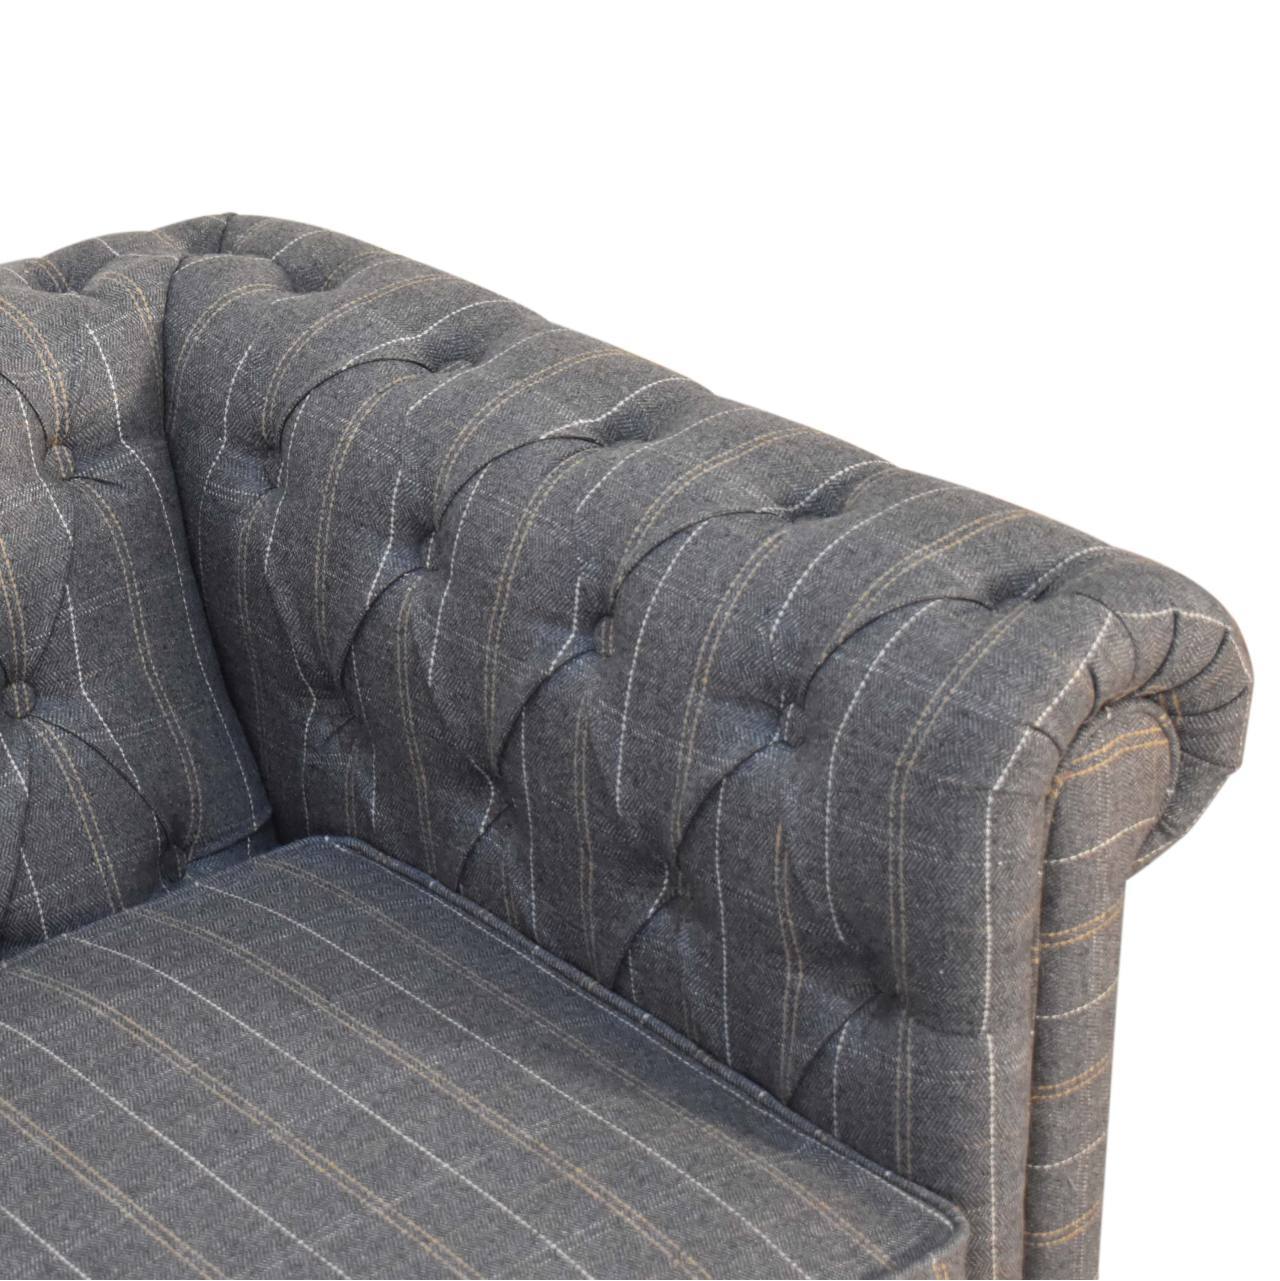 Pewter Tweed Chesterfield 2 Seater Sofa